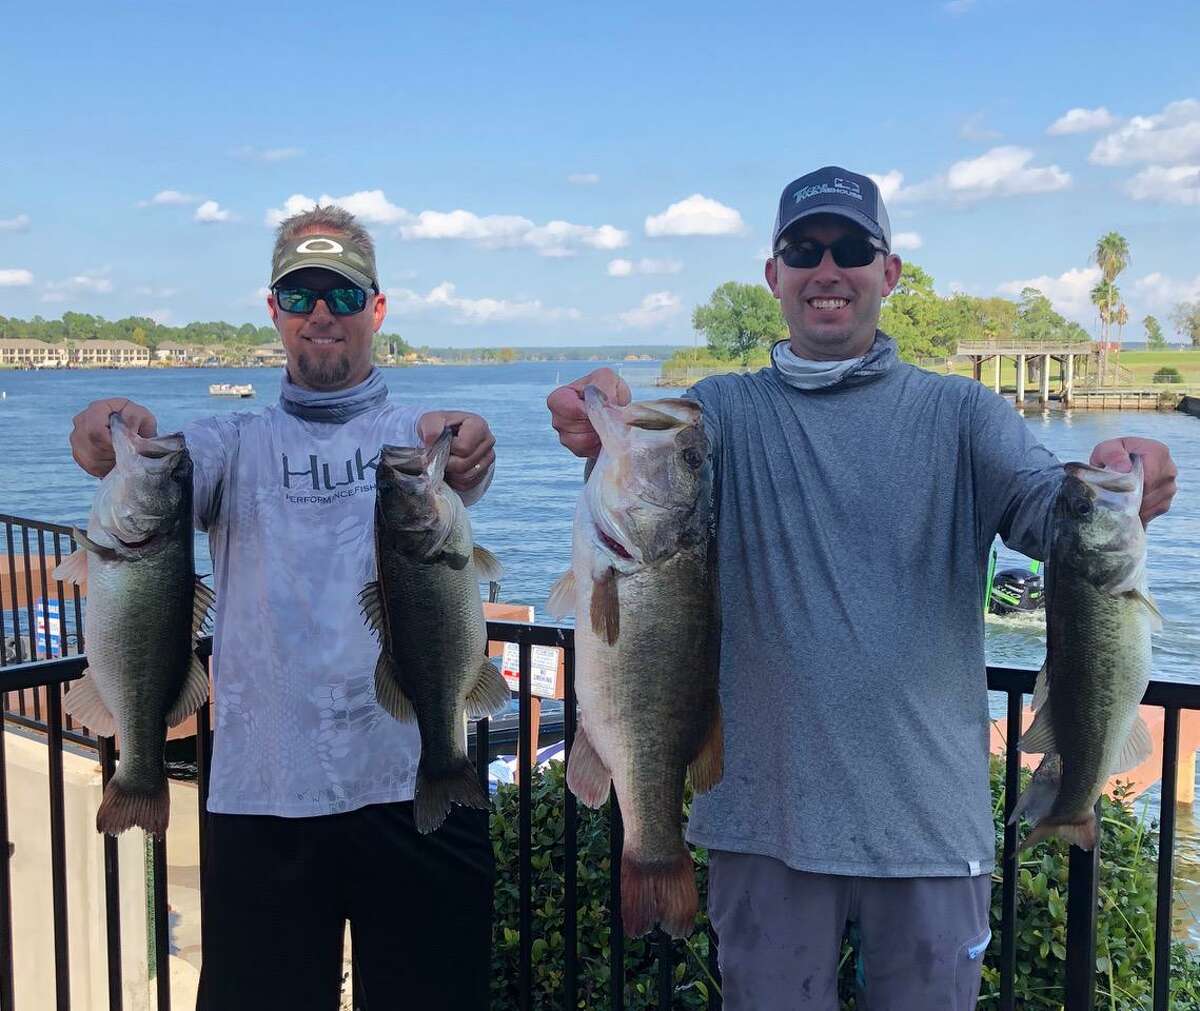 Dan Pinnell and Michael Haworth won the CONROEBASS Mid-Day Madness Championship with a total stringer weight of 20.97 pounds. They also had the big bass of the day that weighed 8.30 pounds.